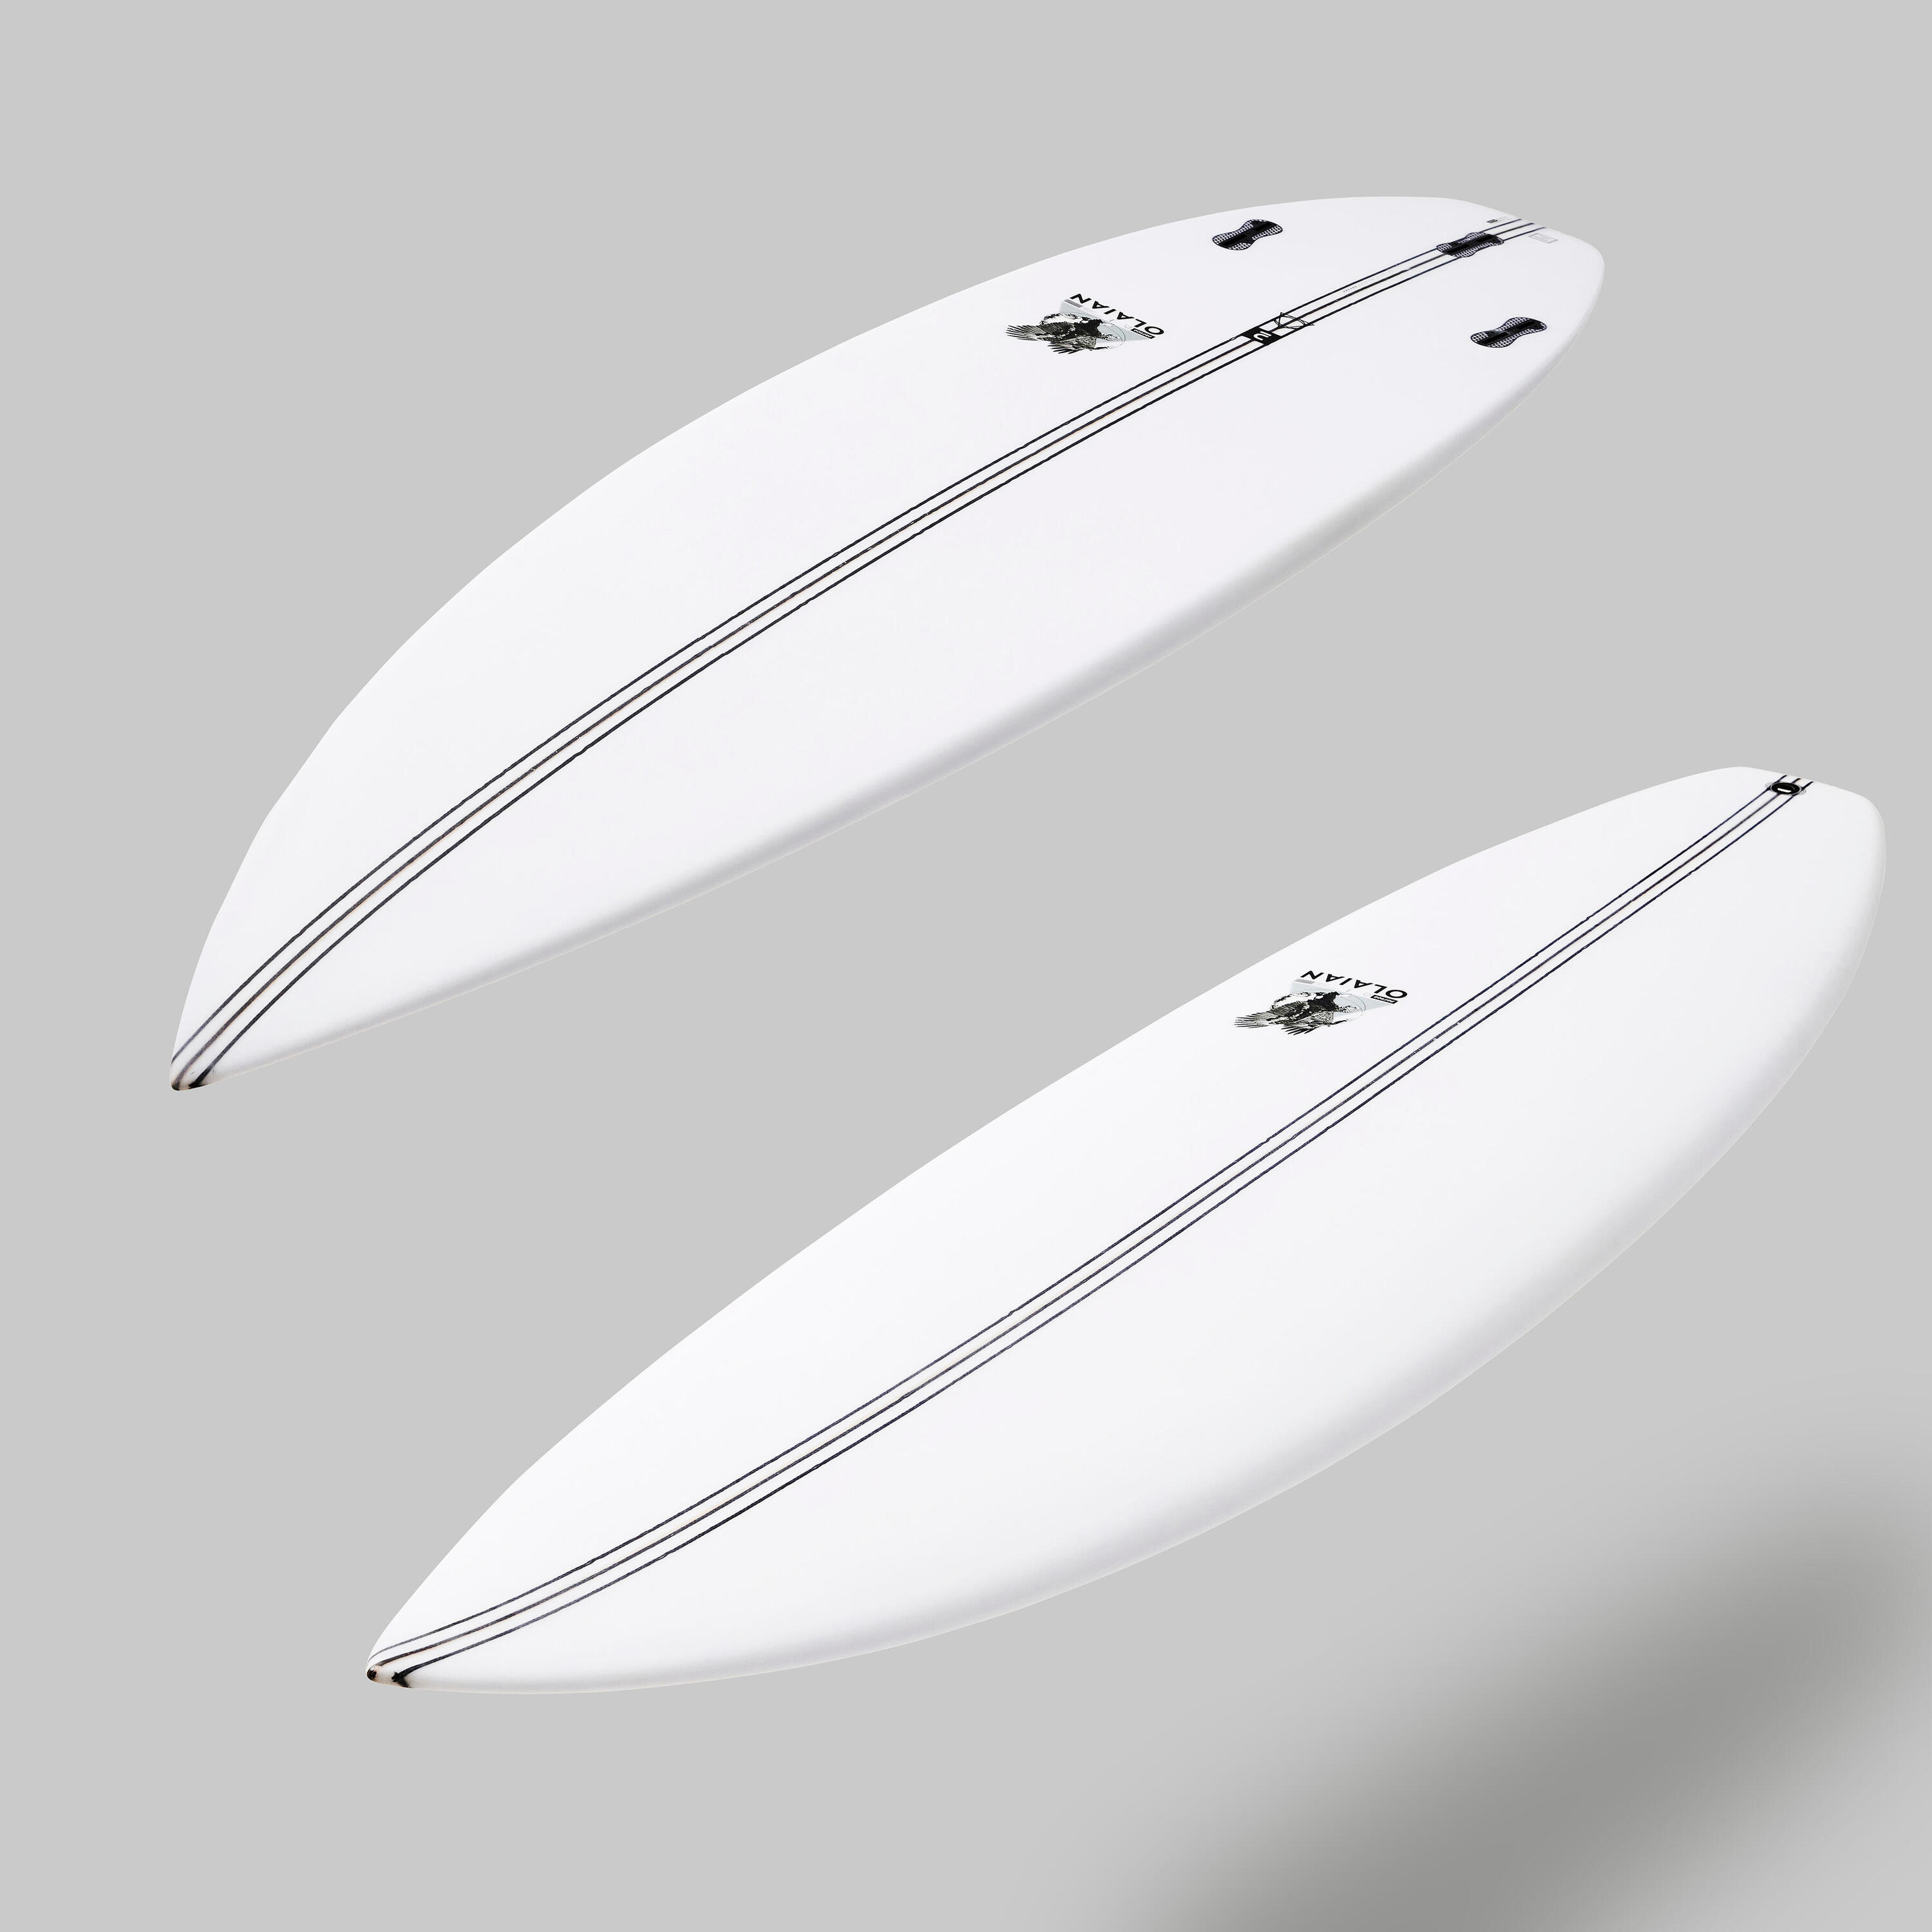 SHORTBOARD 900 PERF 6'2 31 L. Supplied without fins. 6/11